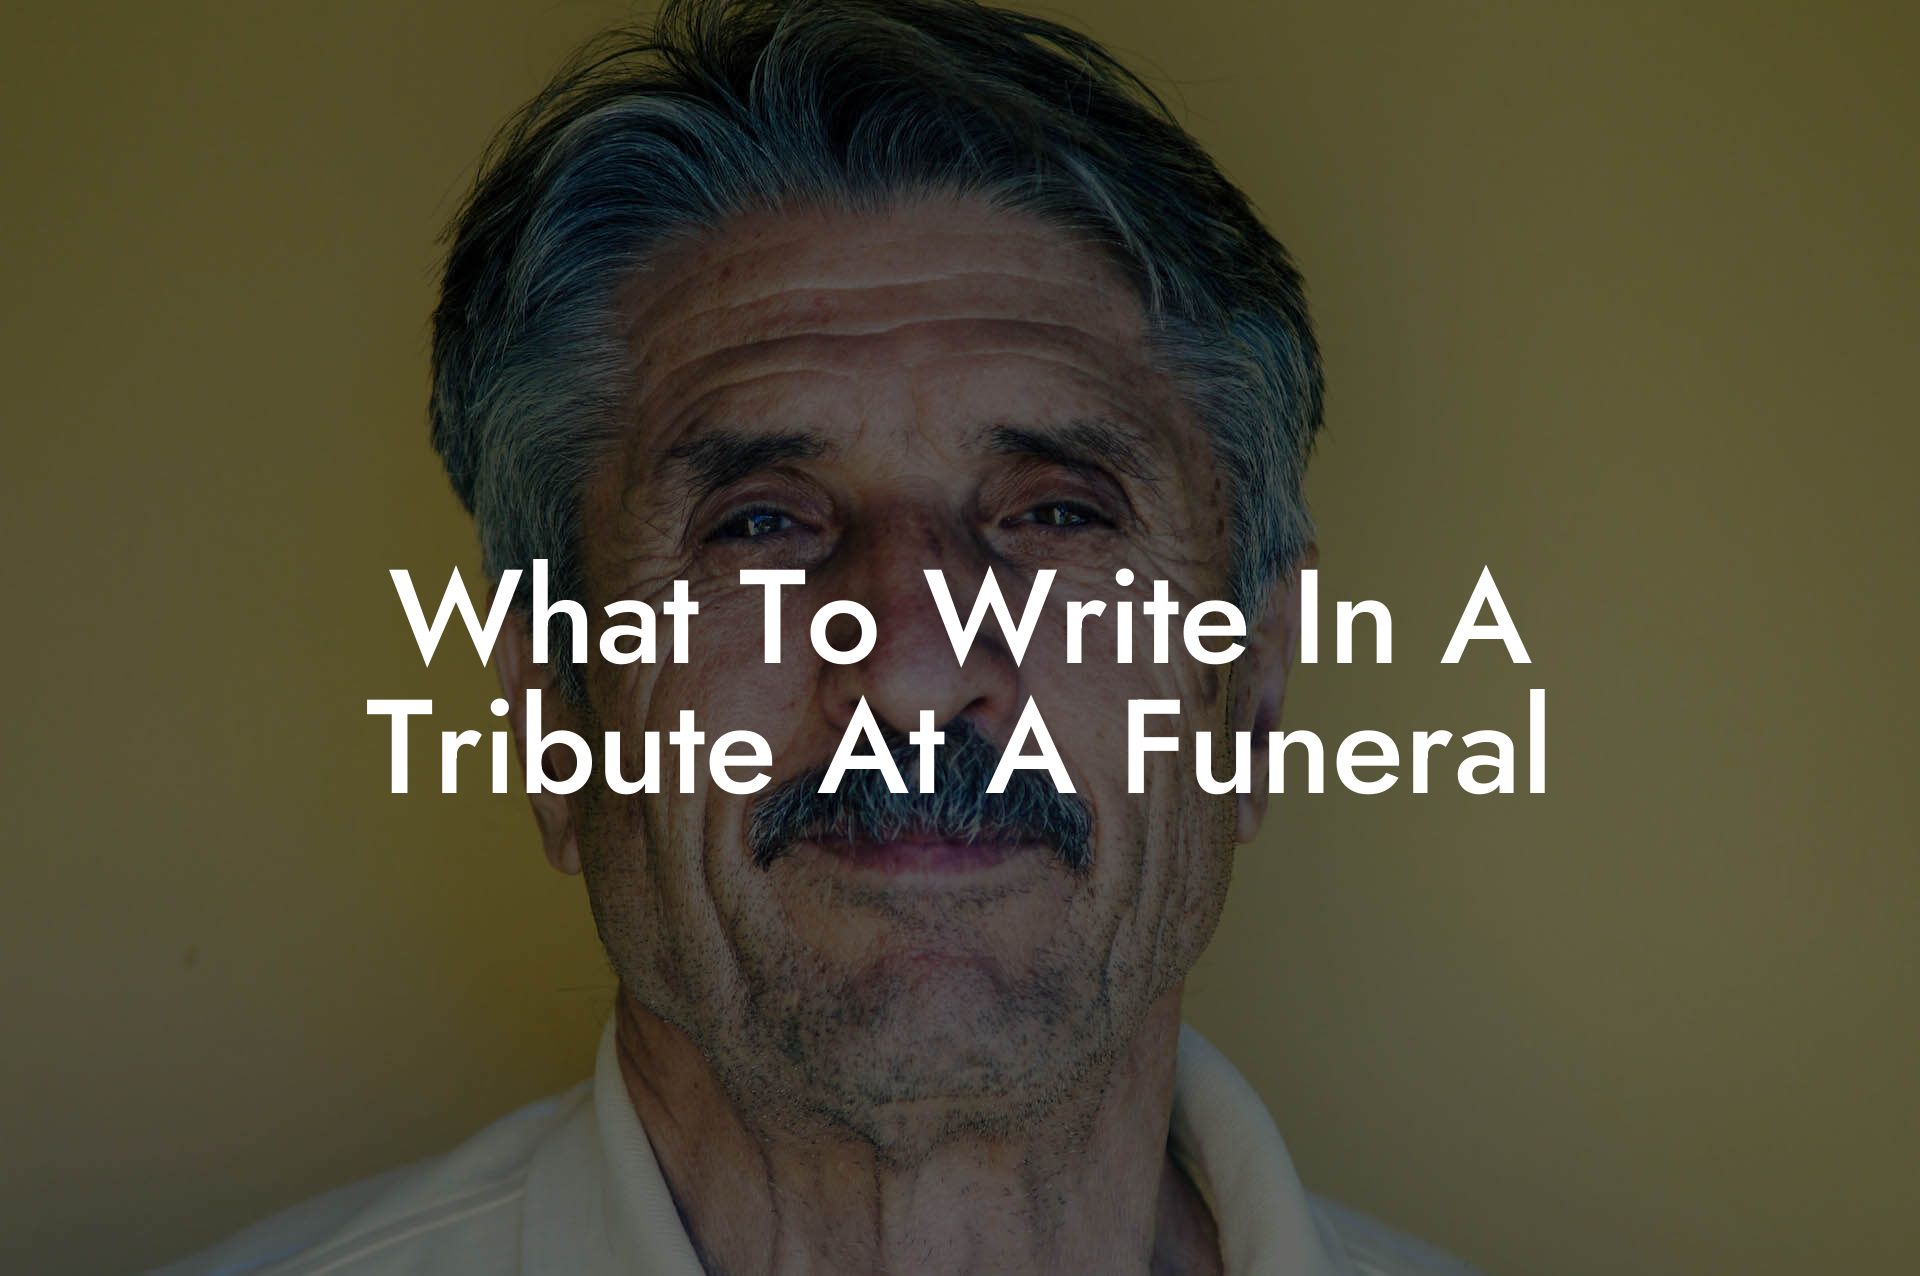 What To Write In A Tribute At A Funeral